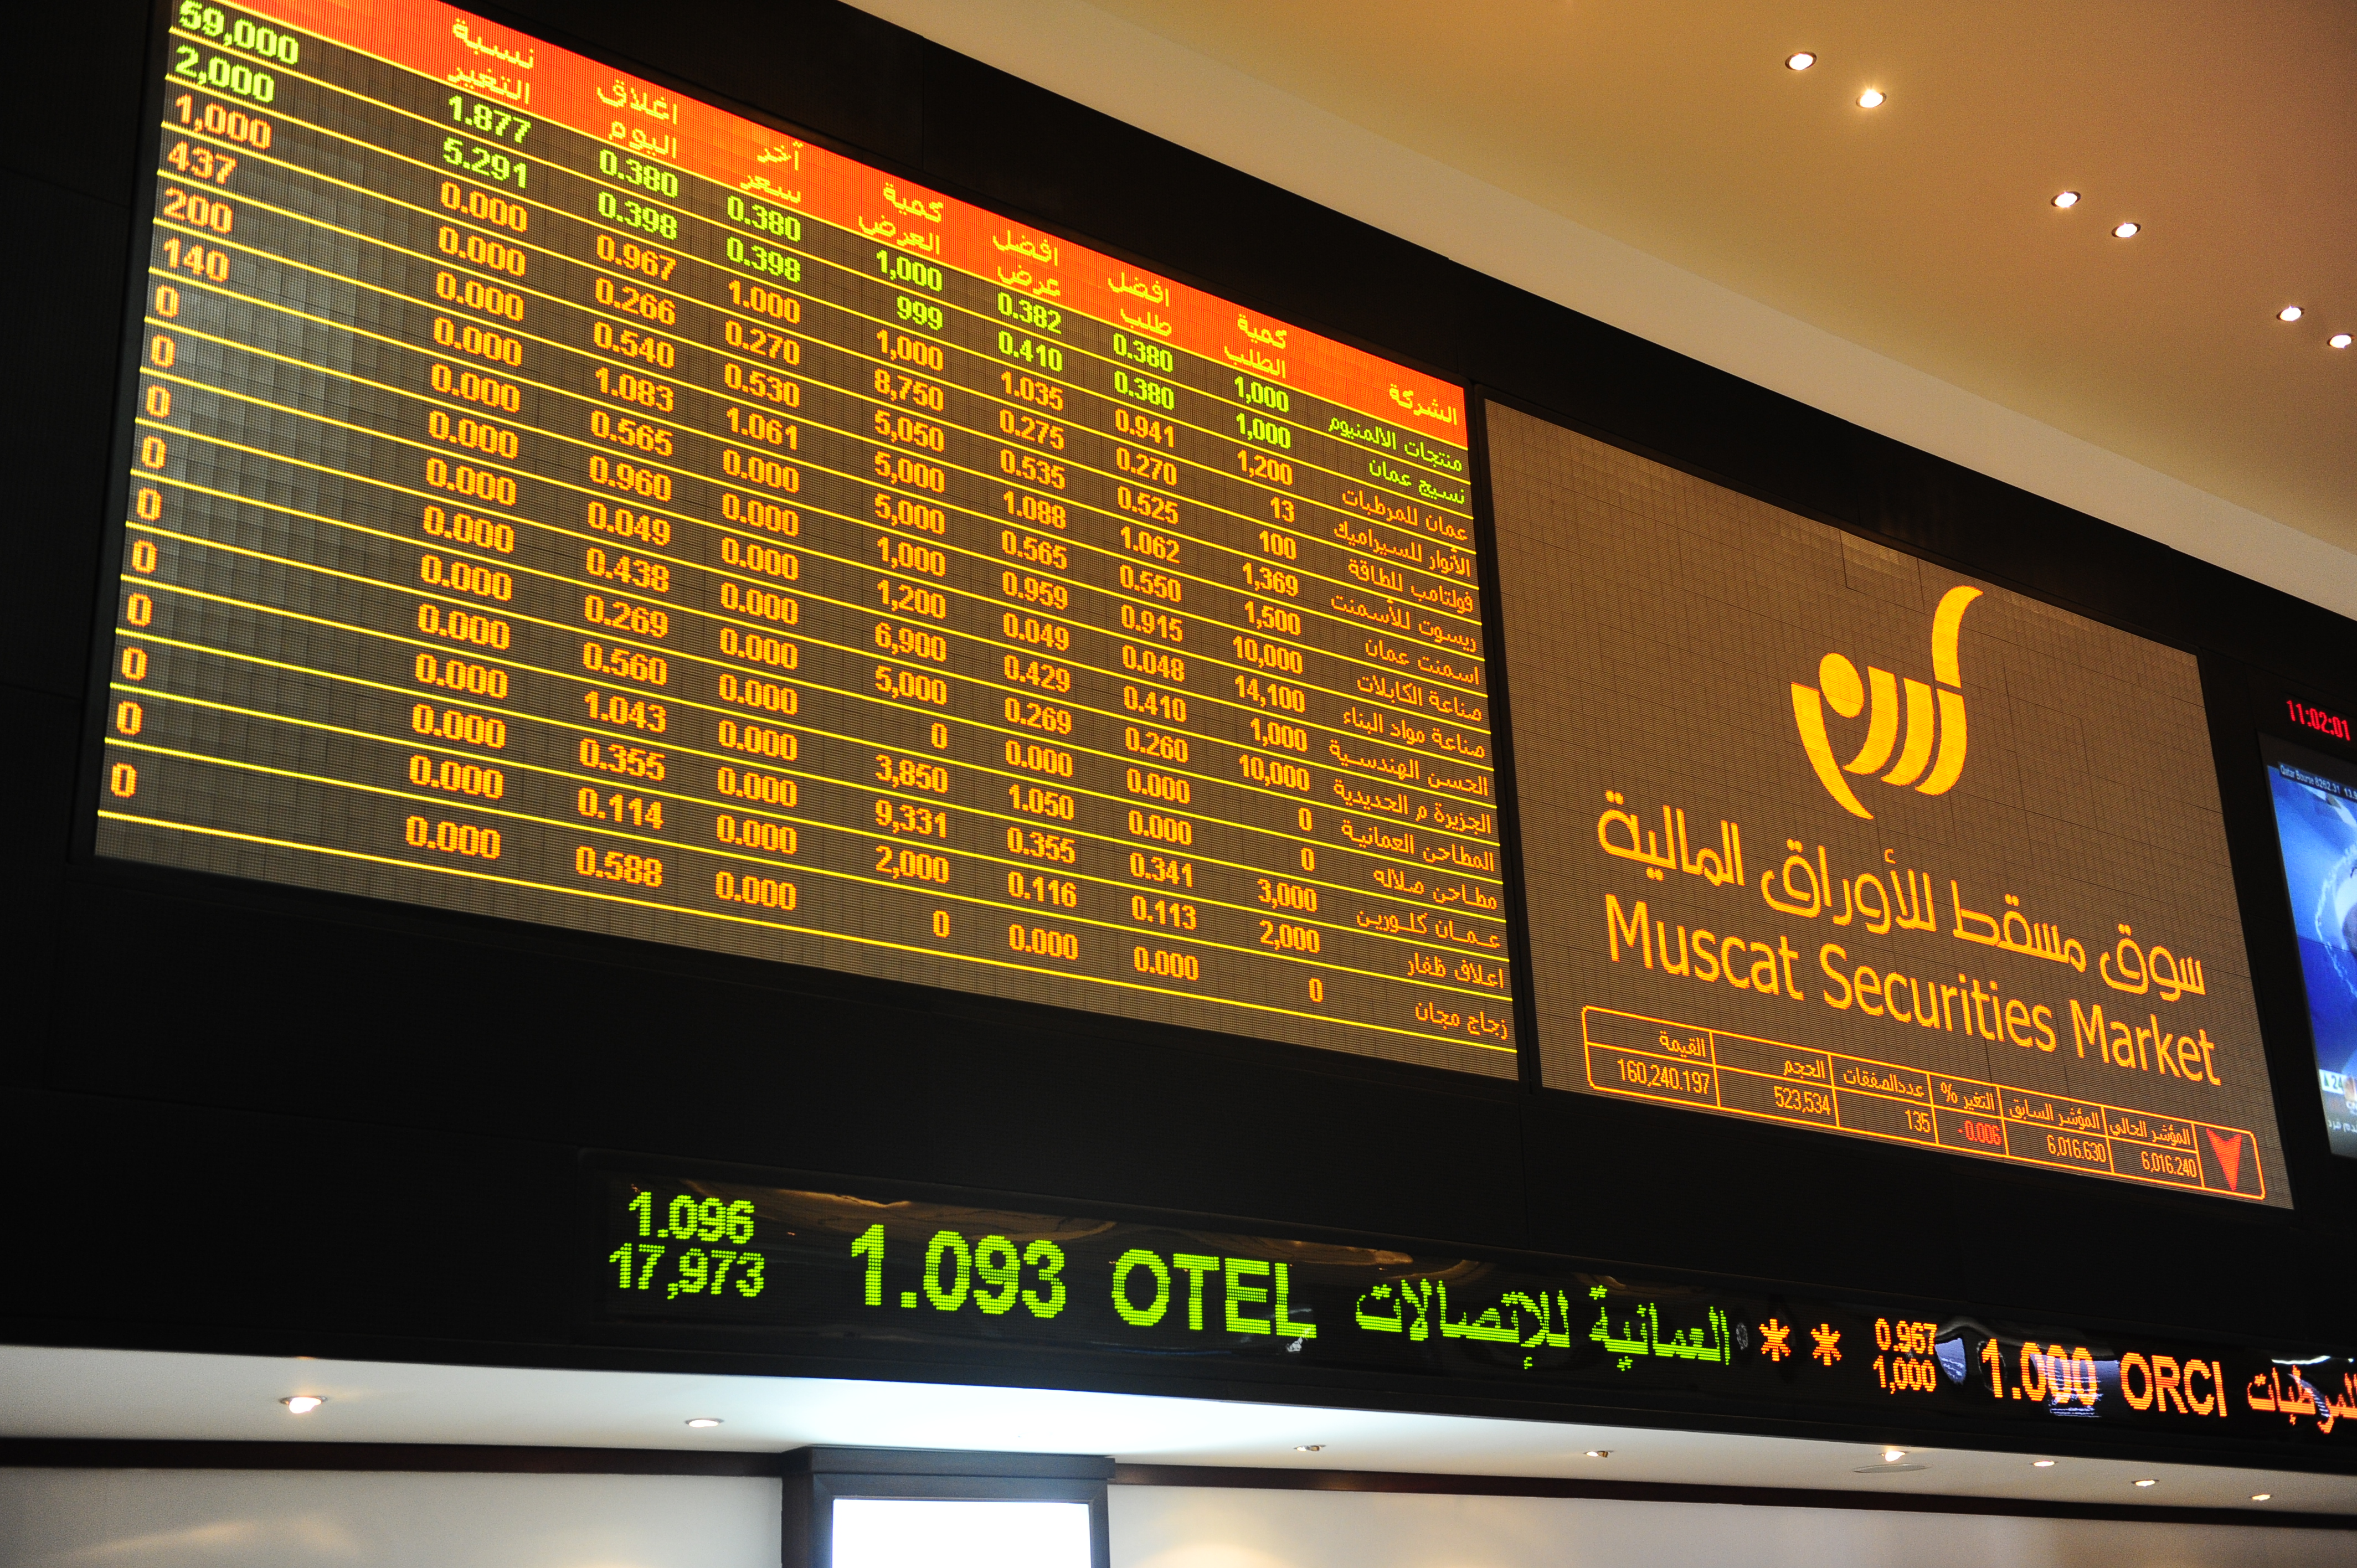 Oman Orix merger with National Finance cleared